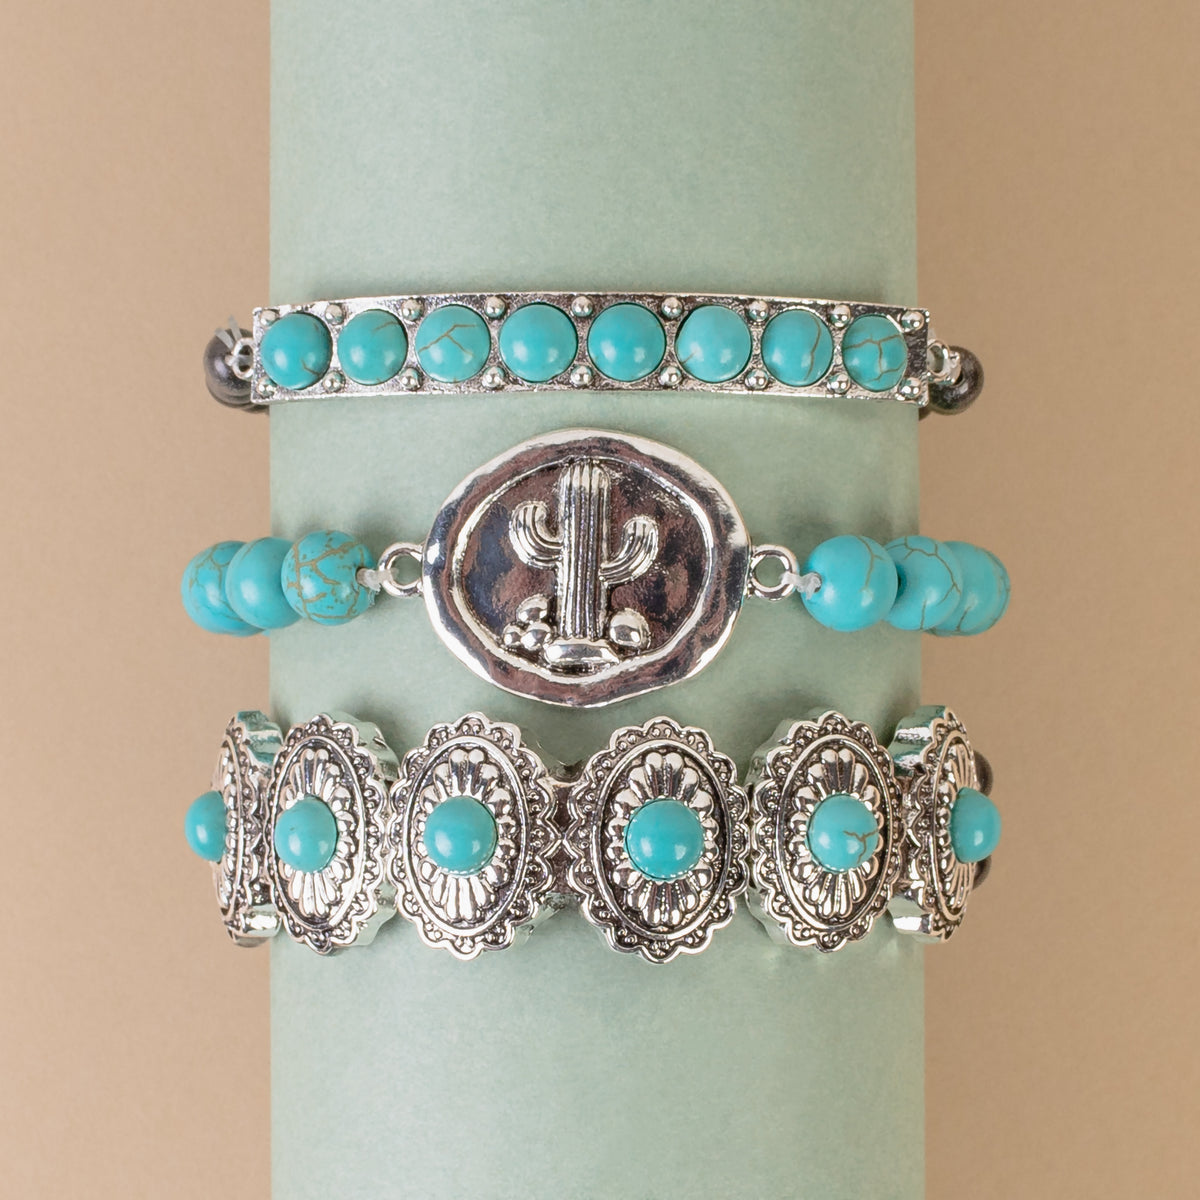 74765 - Stacked Cactus Bracelets - Turquoise & Silver